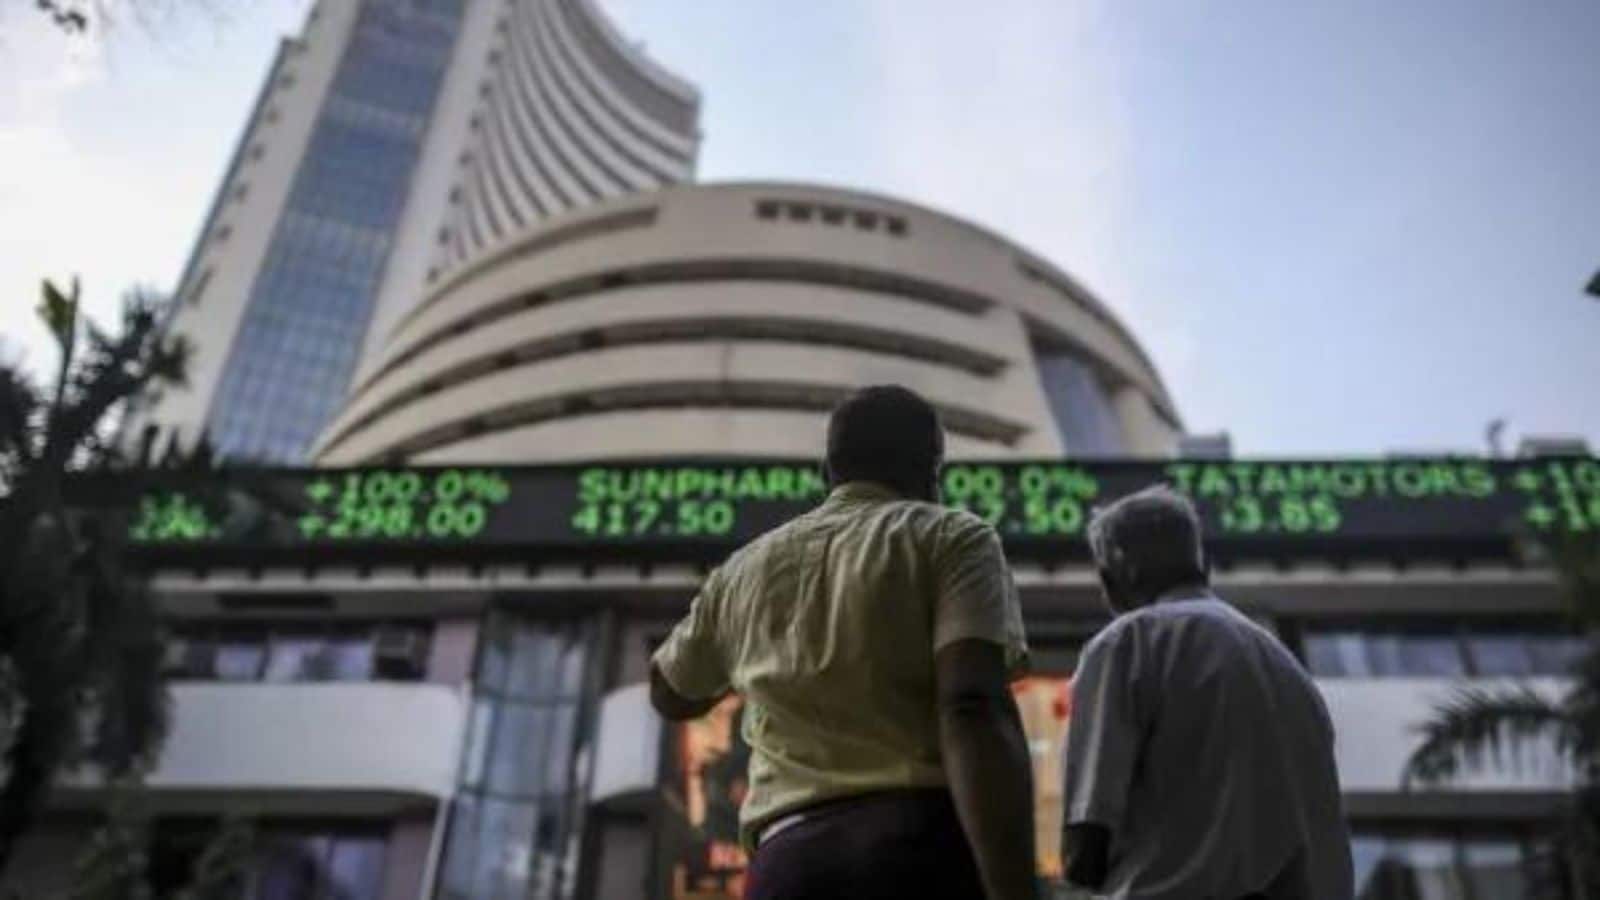 Over 2,600 points up! Sensex, Nifty surge to record highs